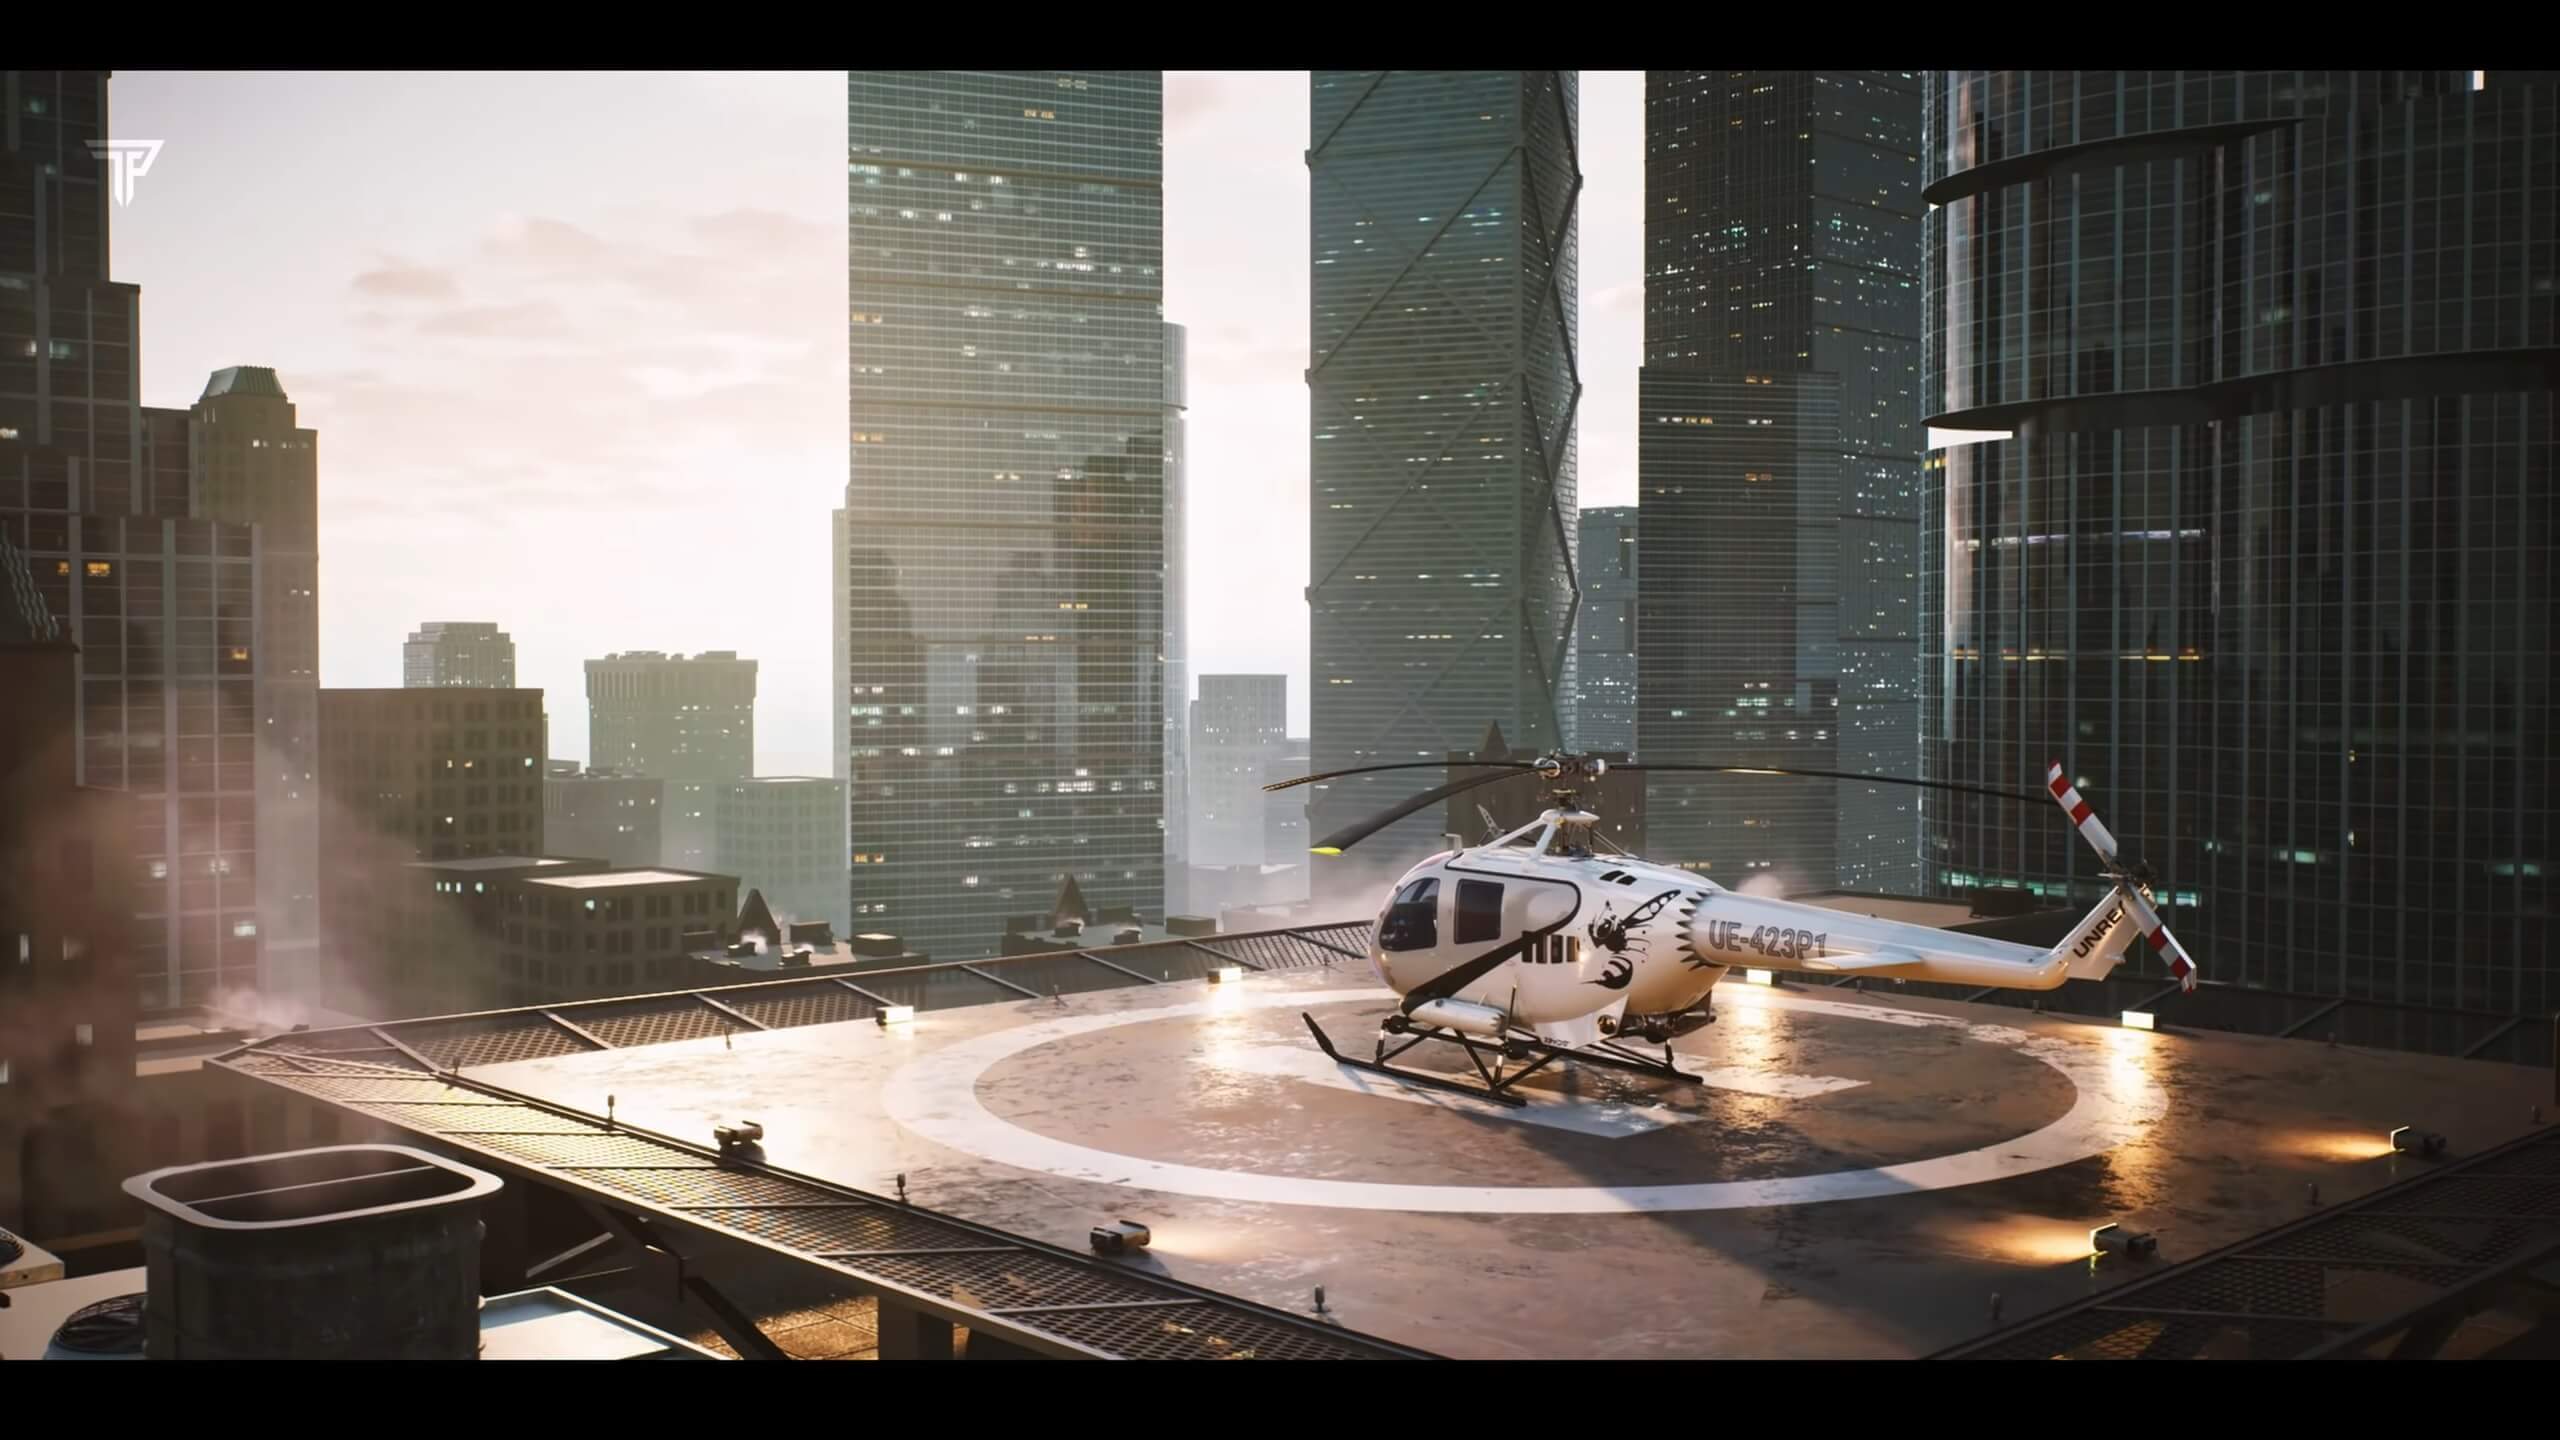 GTA 4 Map Recreated Entirely in Unreal Engine 5; Here's What It Looks Like